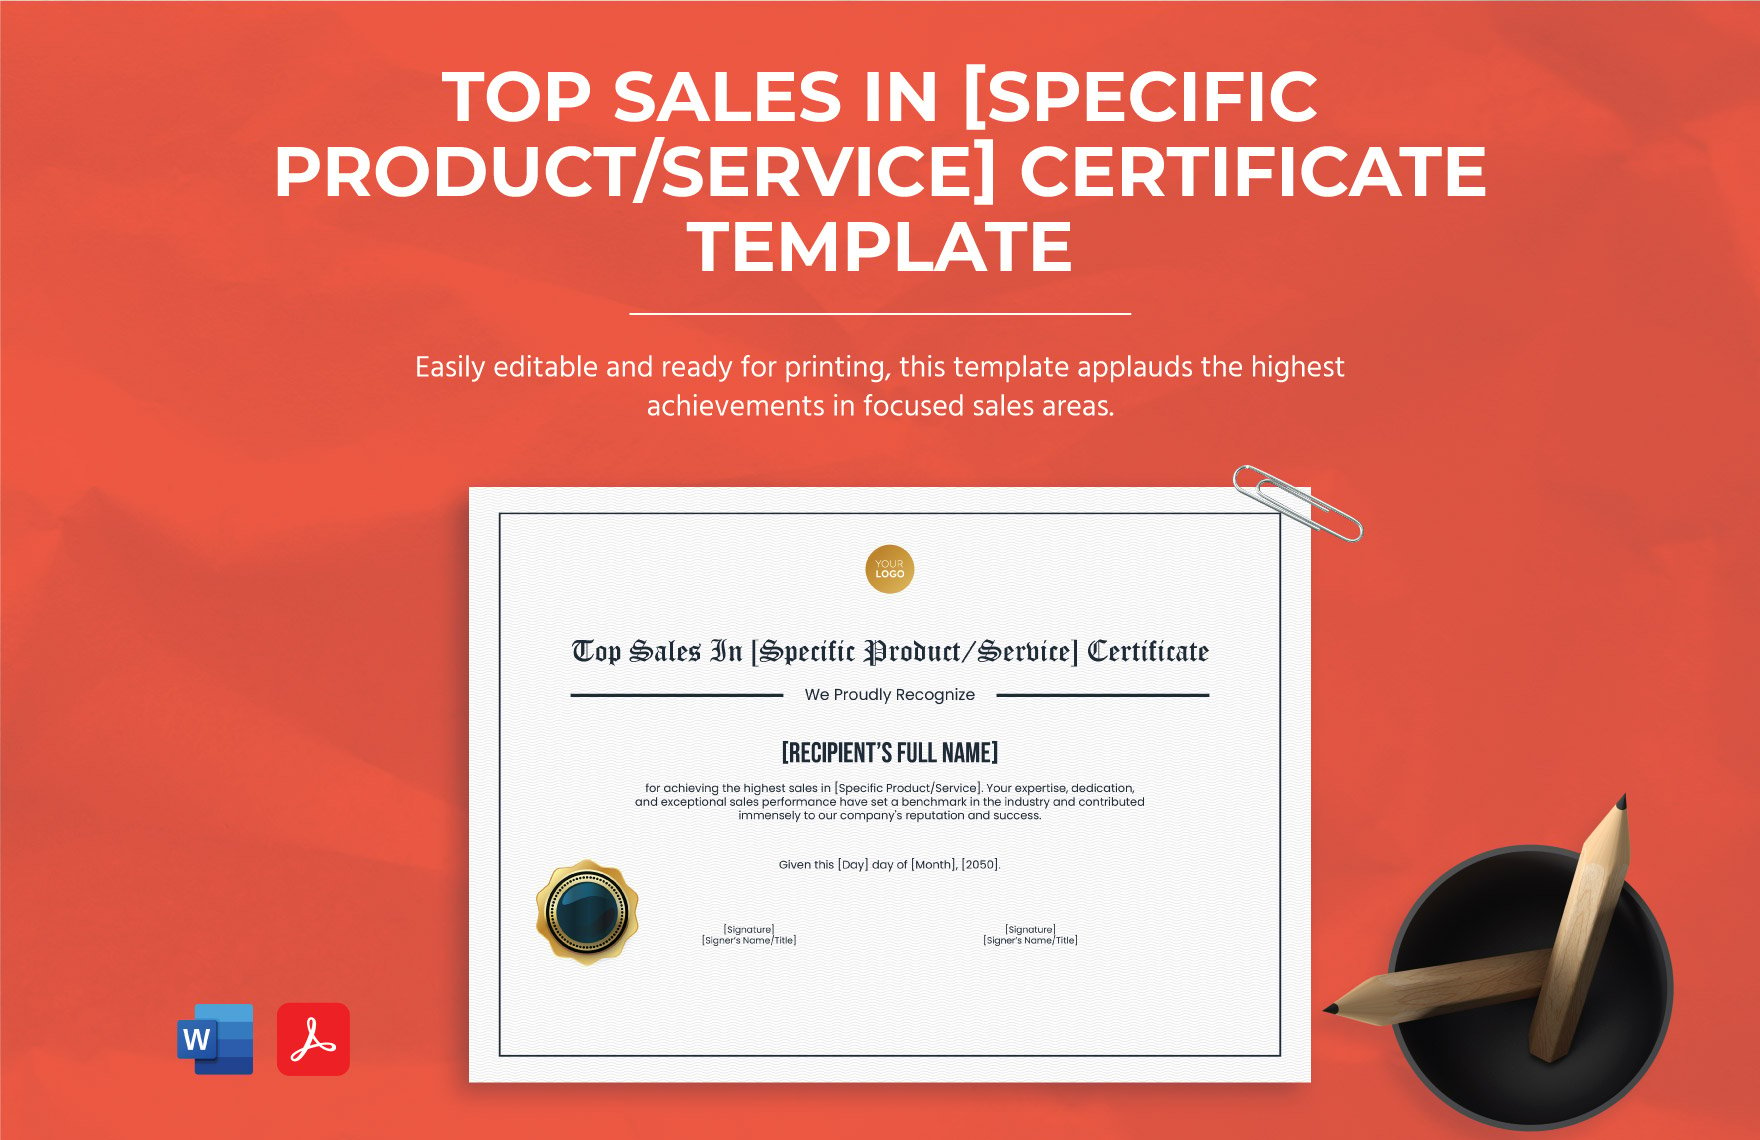 Top Sales in [Specific Product/Service] Certificate Template